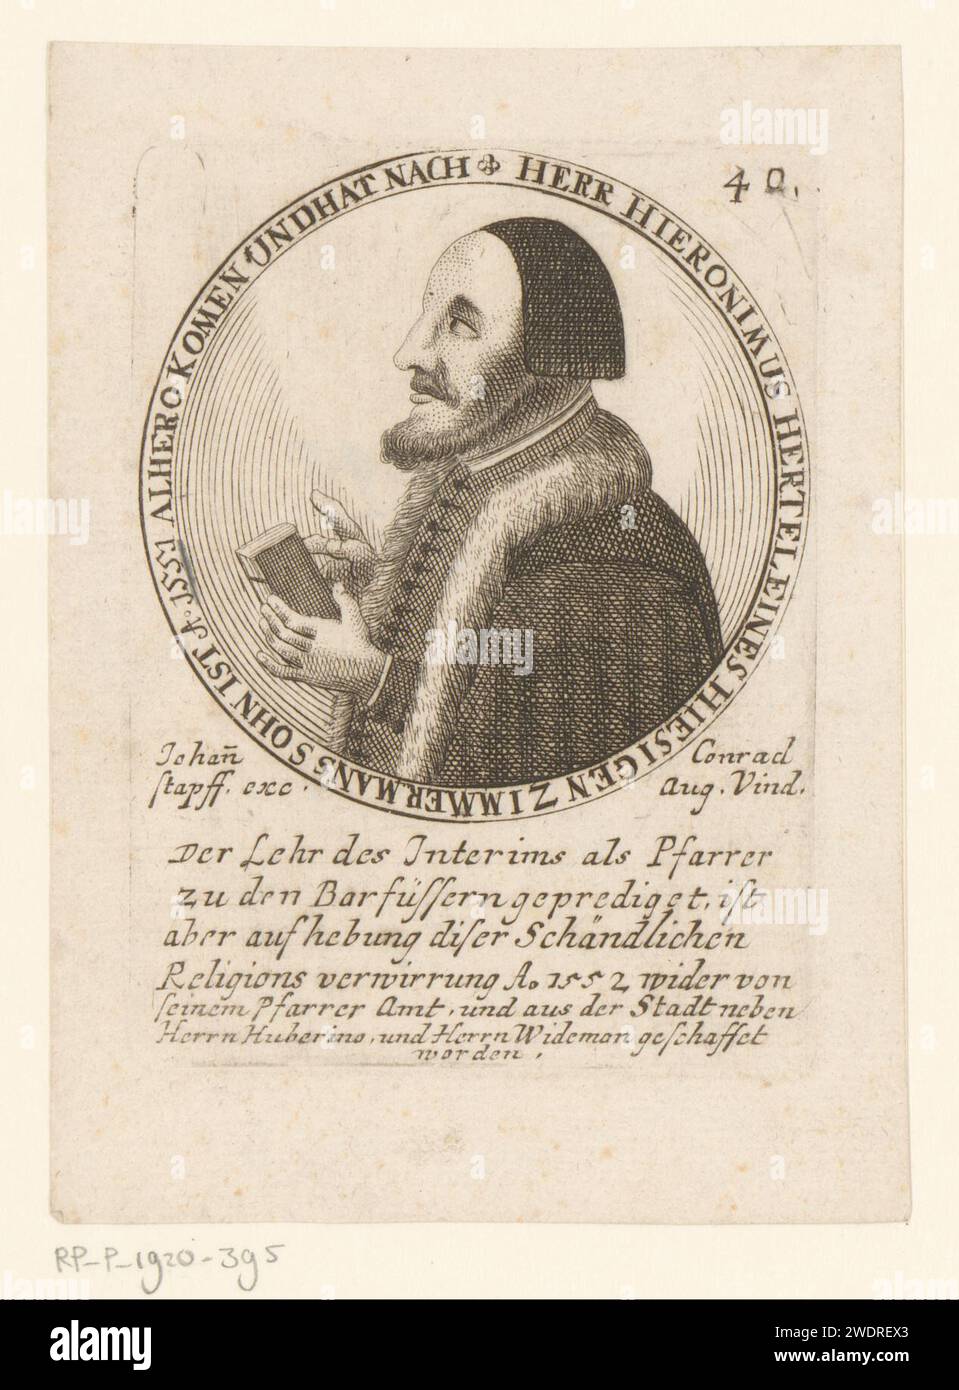 Portrait of Hieronymus Hertel, Anonymous, Johann Conrad Stapf (16th century), 1551 - c. 1600 print Numbered at the top right: 40. Augsburg paper engraving / etching historical persons Stock Photo